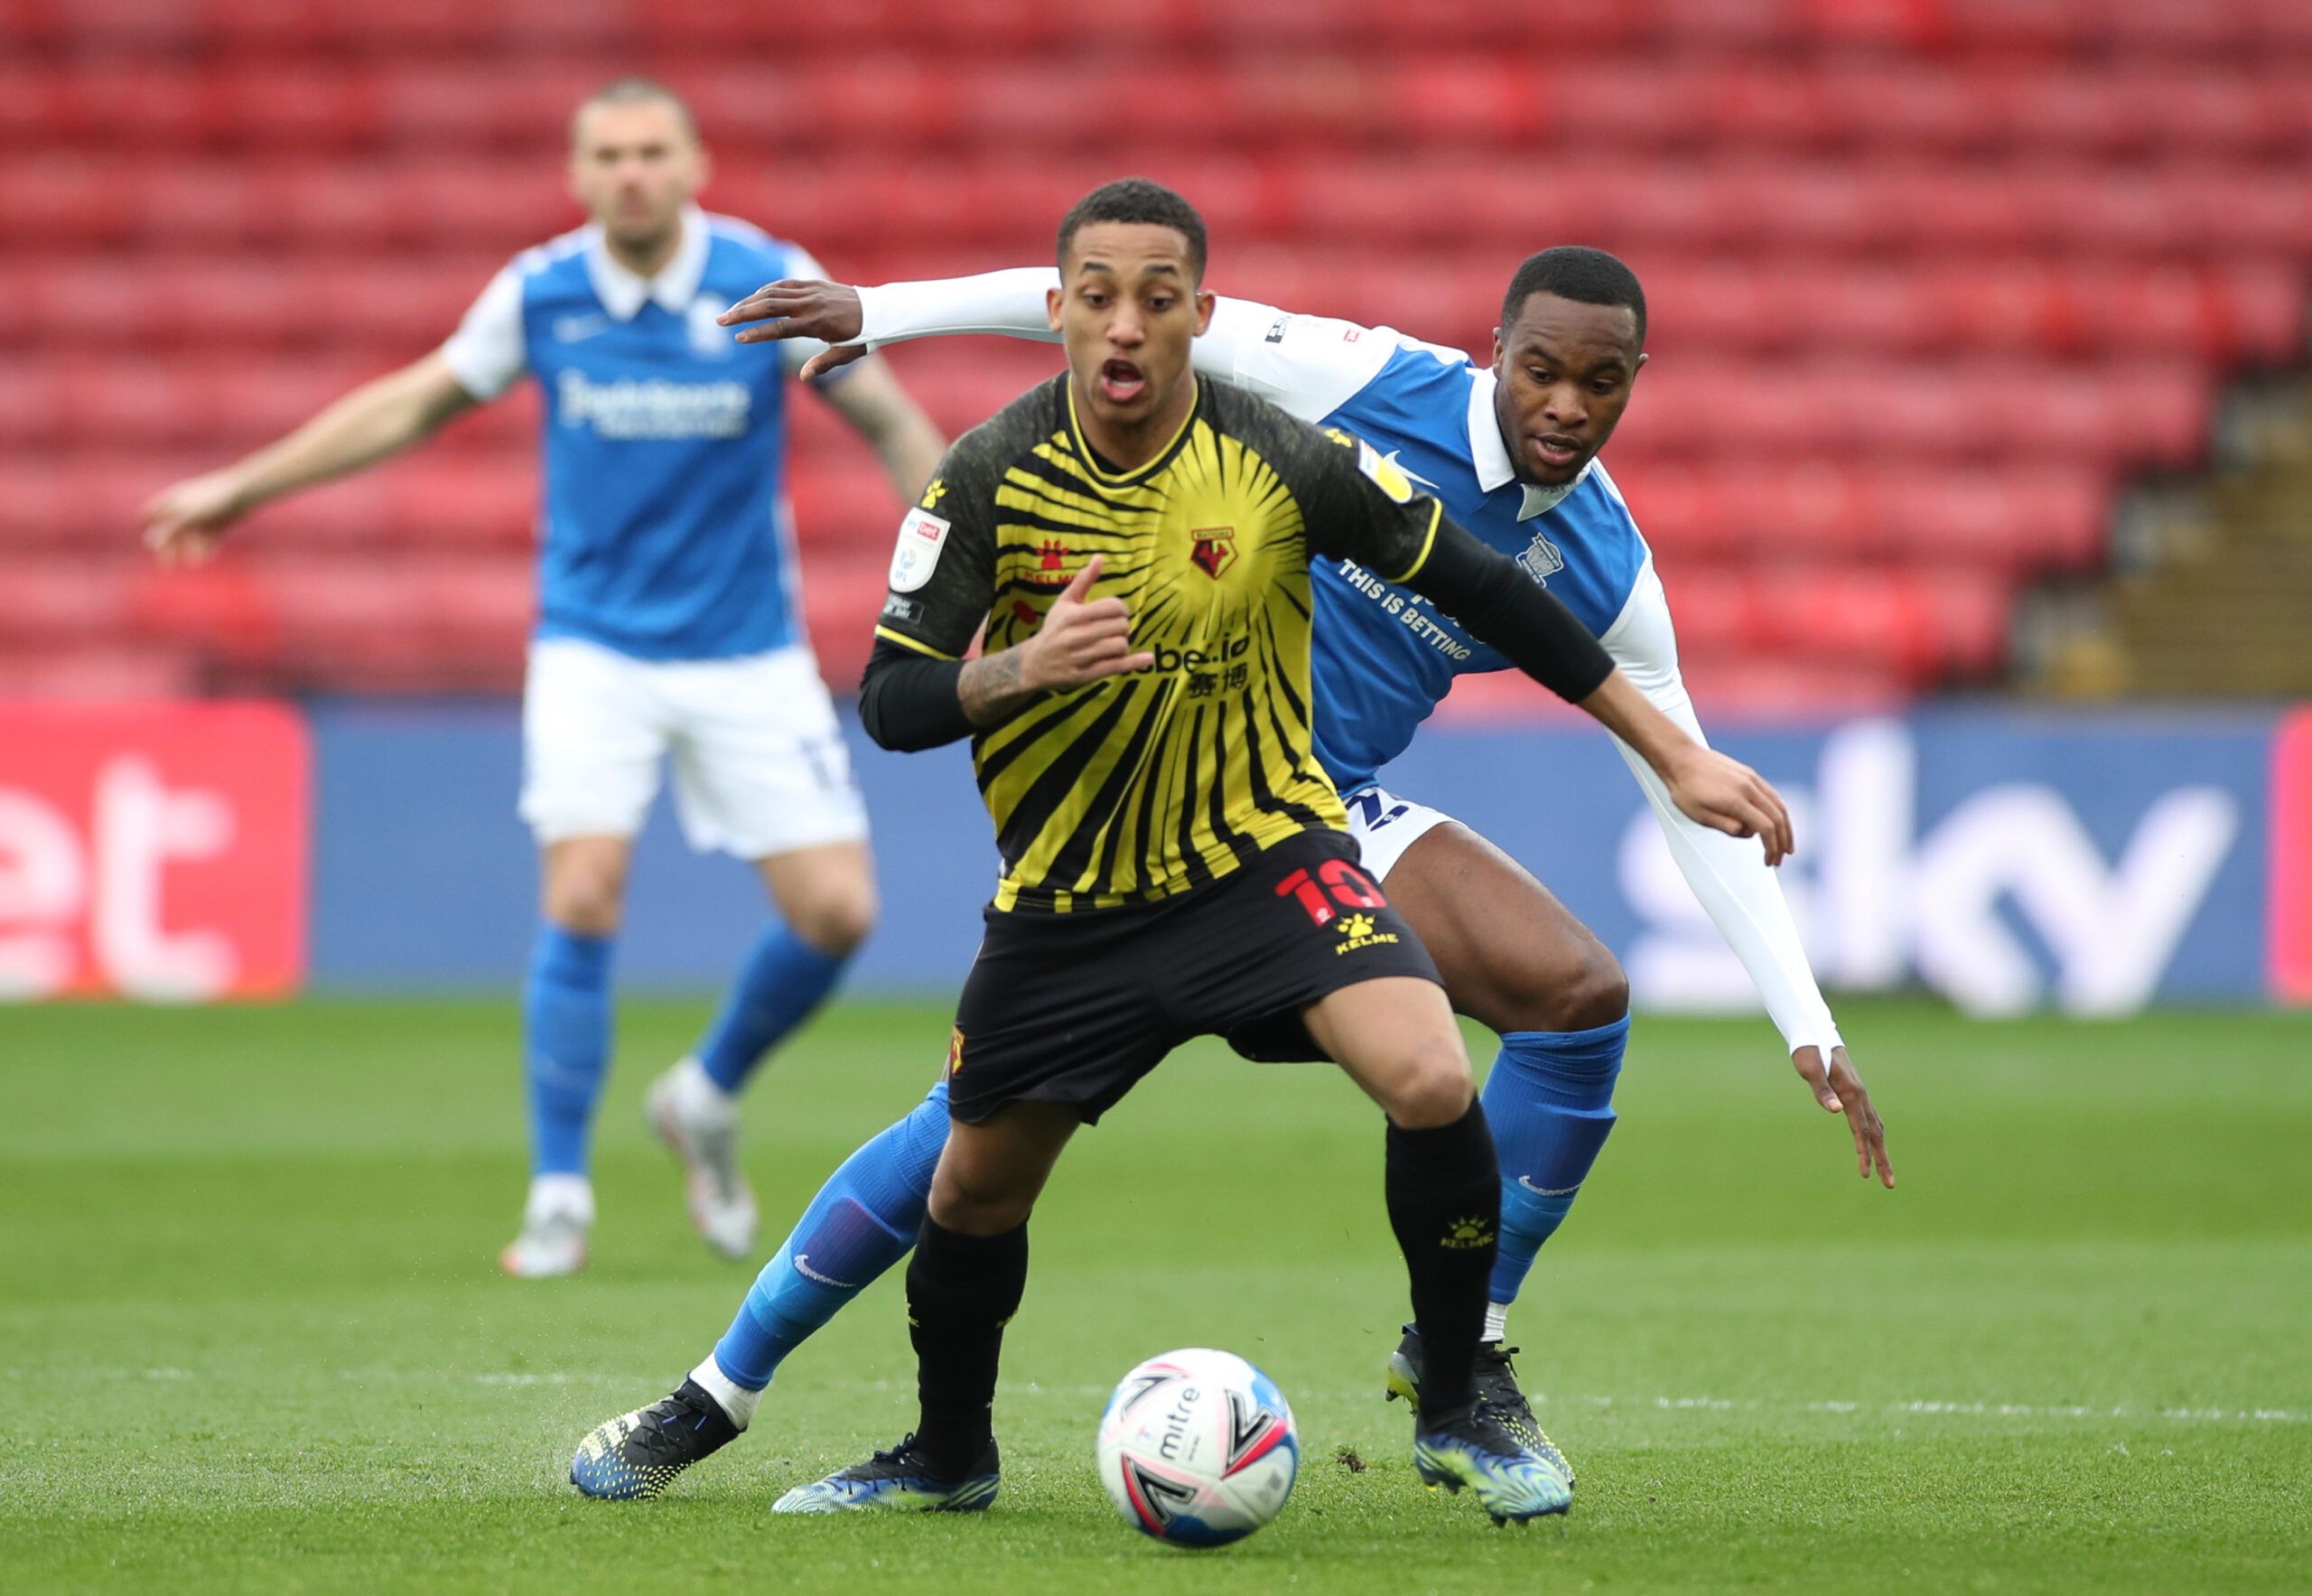 Soccer Football - Championship - Watford v Birmingham City - Vicarage Road, Watford, Britain - March 20, 2021 Watford’s Joao Pedro in action with Birmingham City’s Rekeem Harper Action Images/Peter Cziborra EDITORIAL USE ONLY. No use with unauthorized audio, video, data, fixture lists, club/league logos or 'live' services. Online in-match use limited to 75 images, no video emulation. No use in betting, games or single club /league/player publications.  Please contact your account representative 